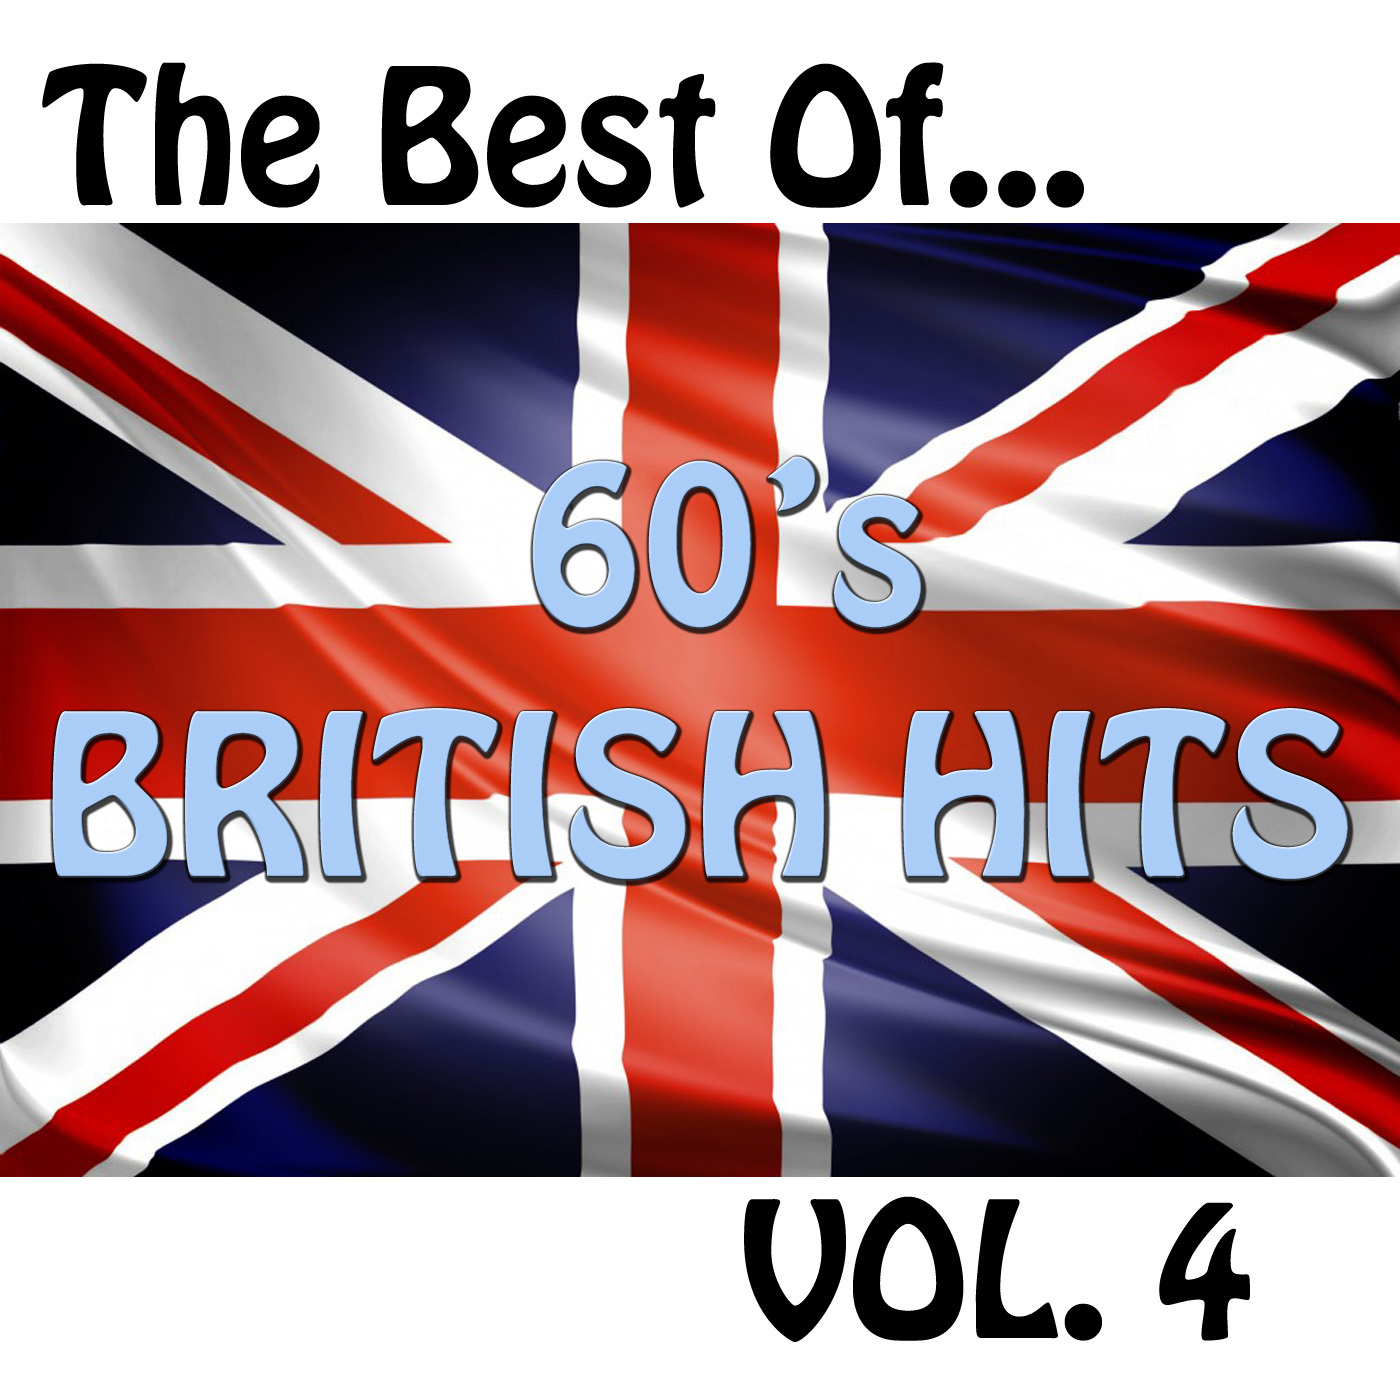 The Best of 60's British Hits Vol. 4